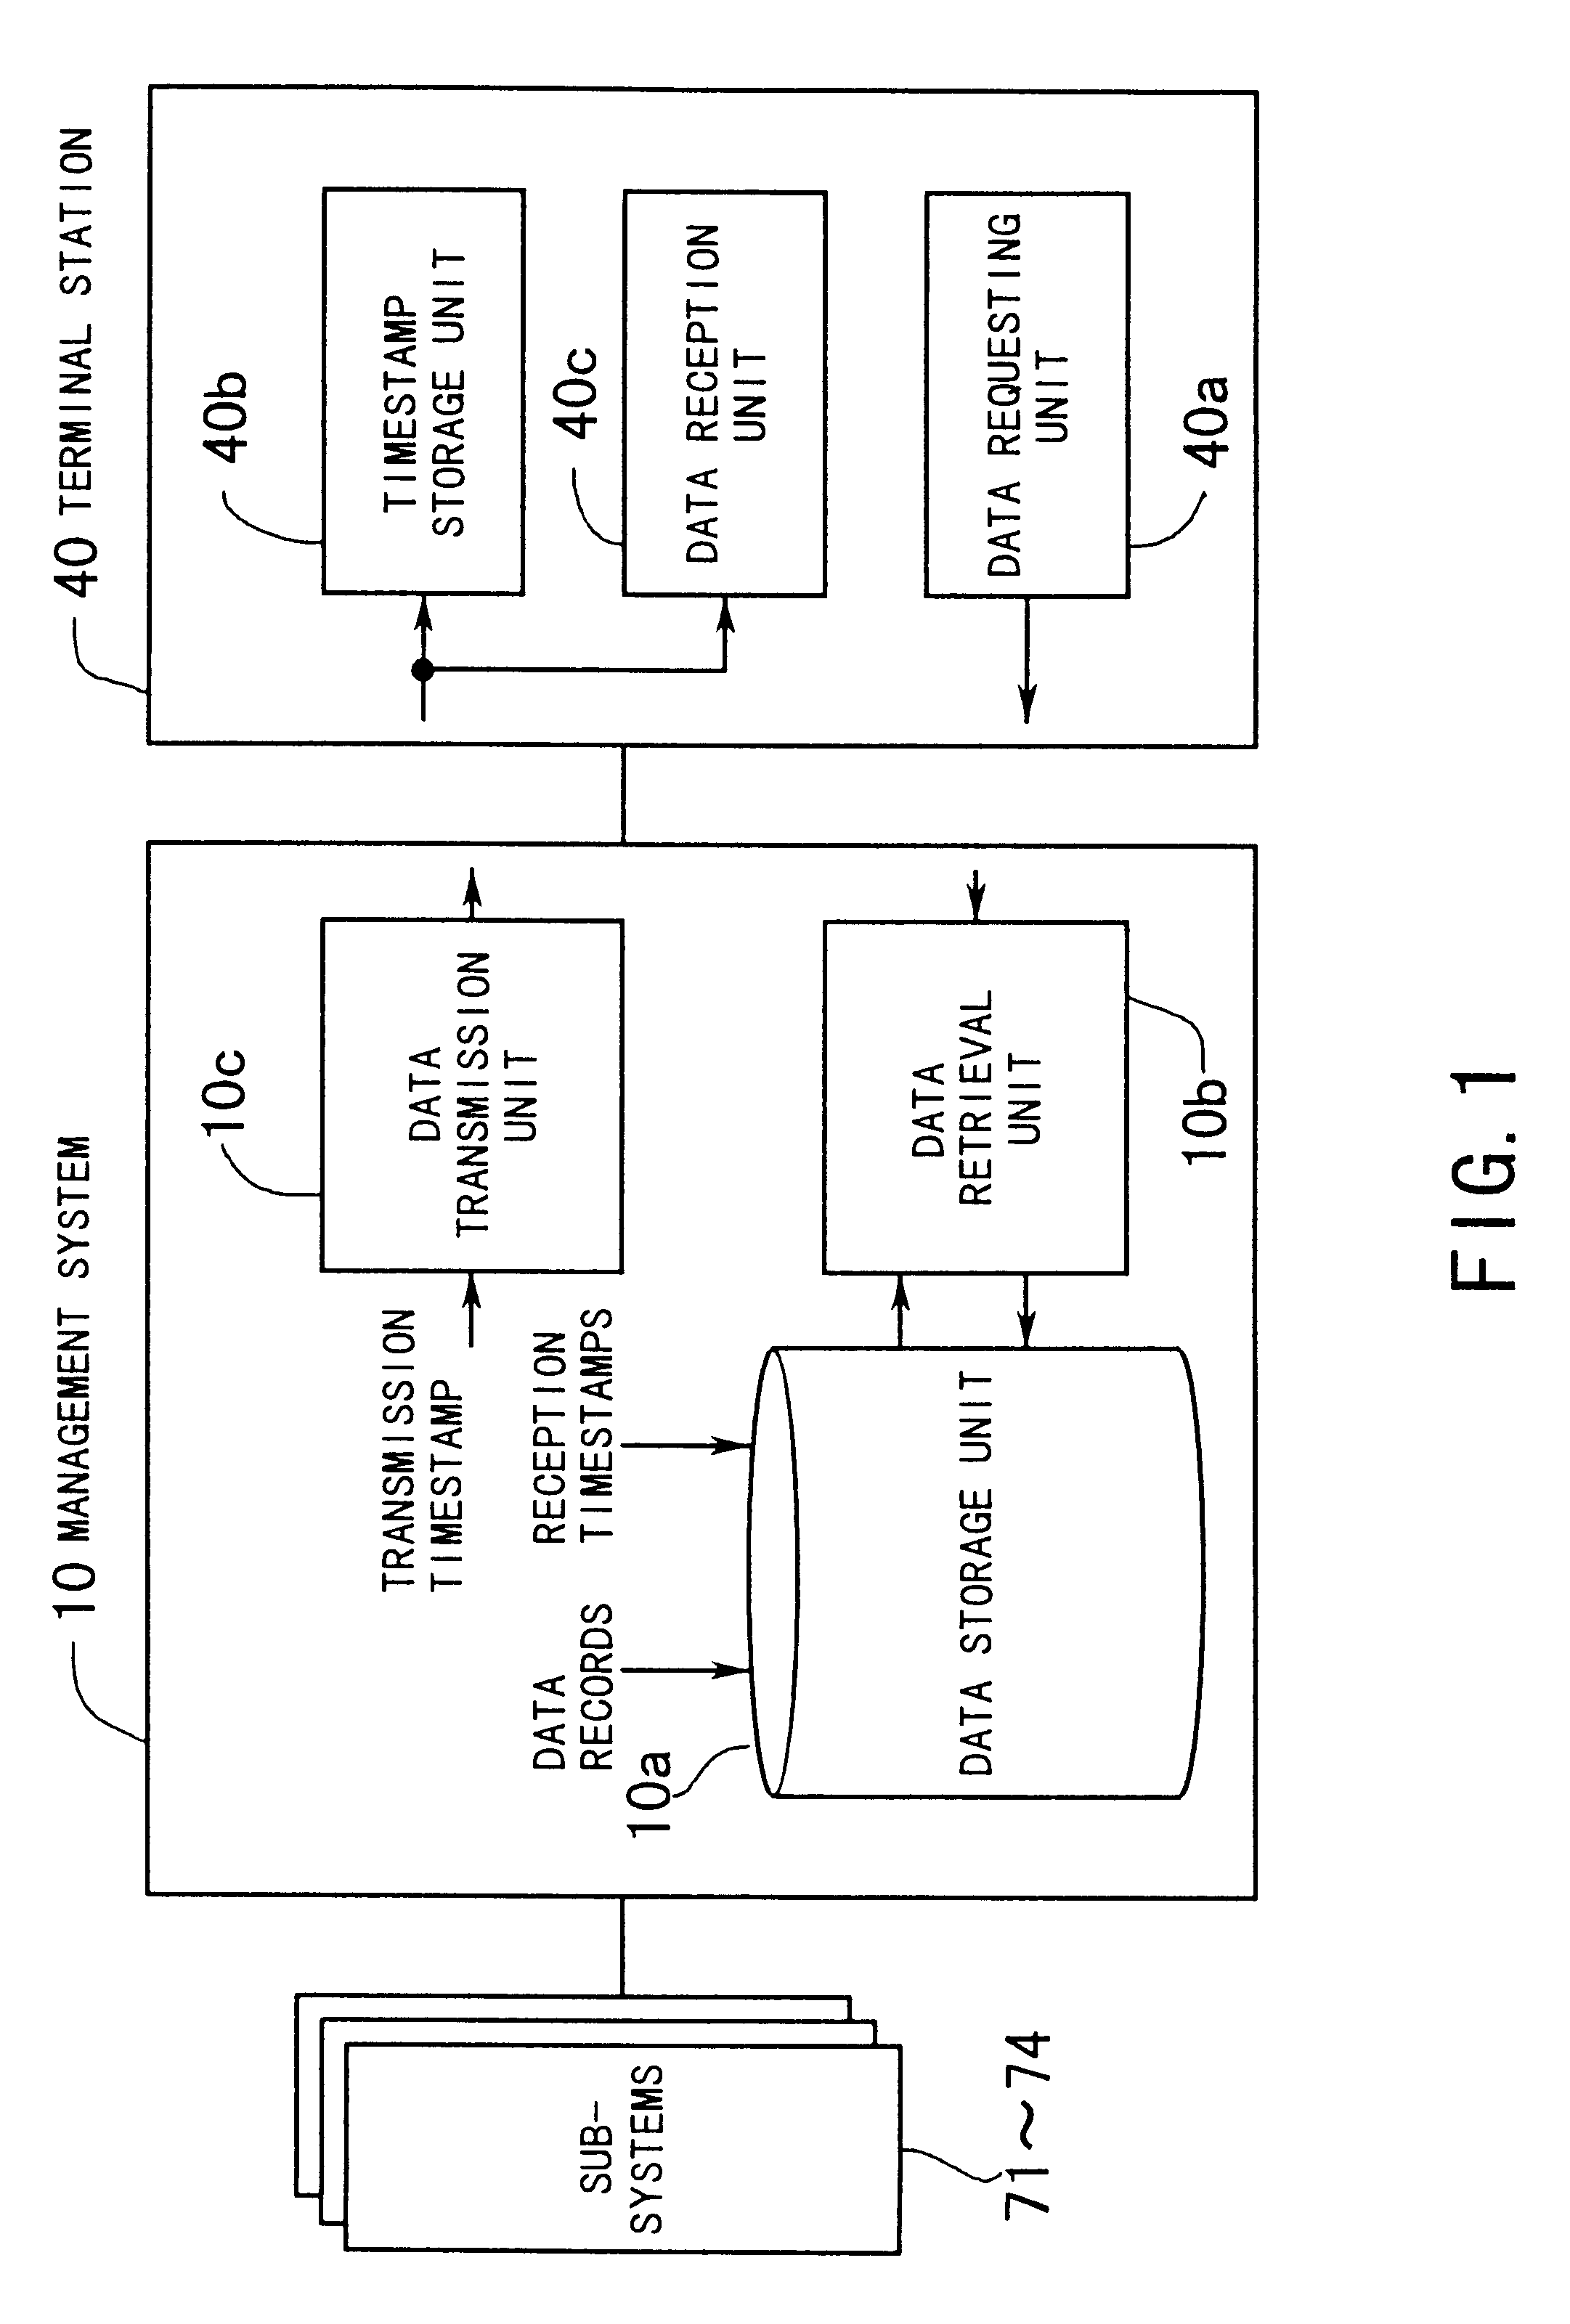 Method and system for controlling data delivery and reception based on timestamps of data records